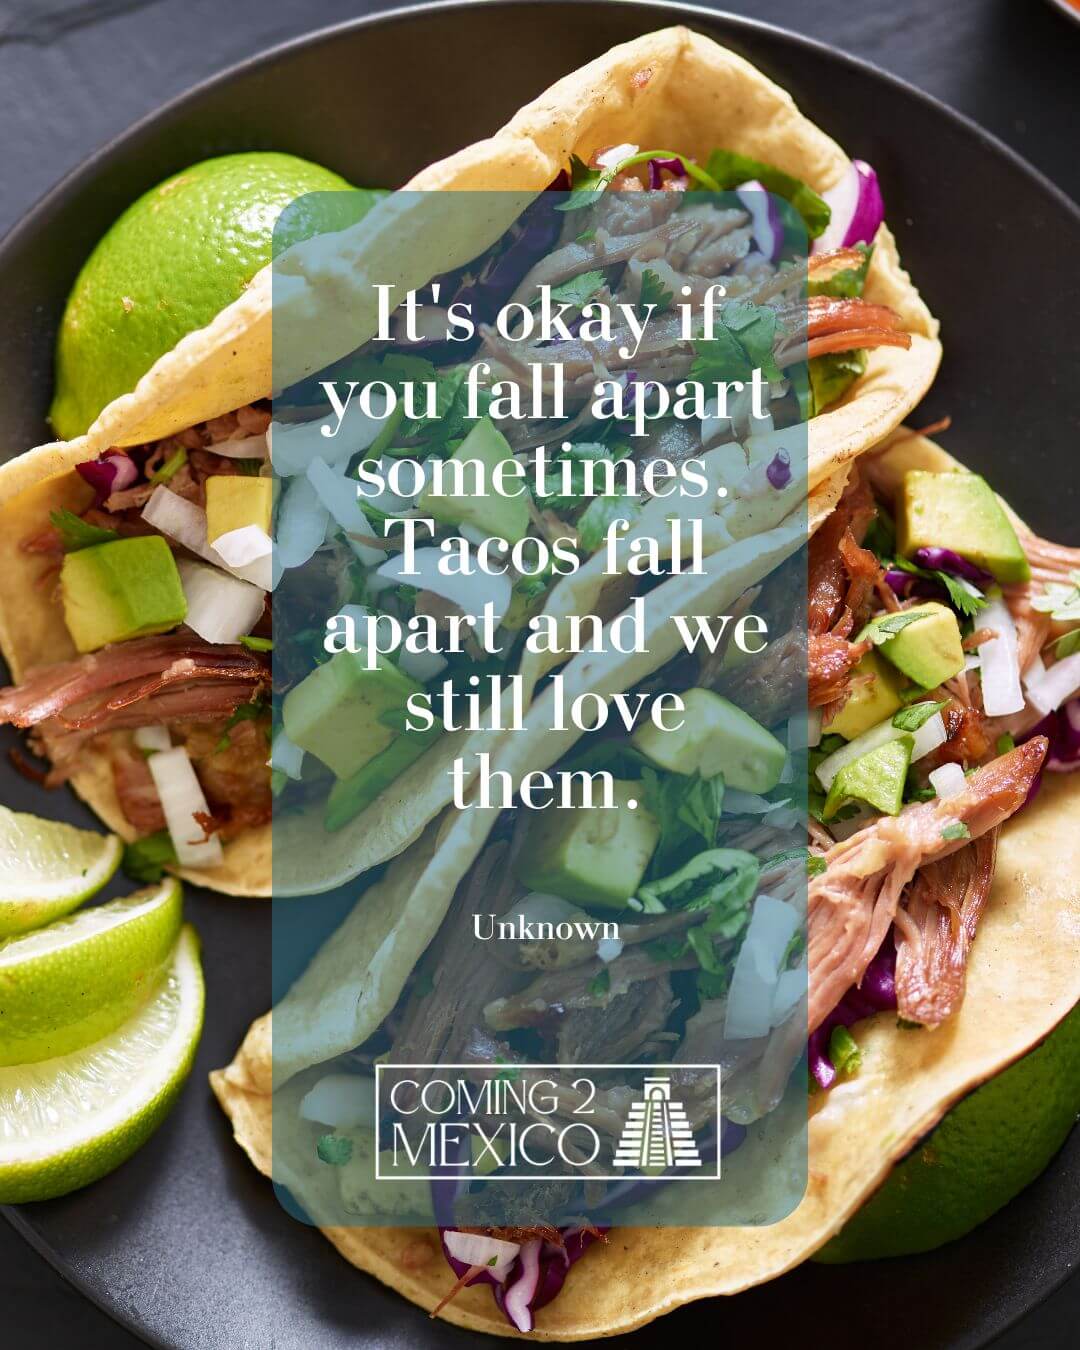 It's okay if you fall apart sometimes. Tacos fall apart and we still love them.